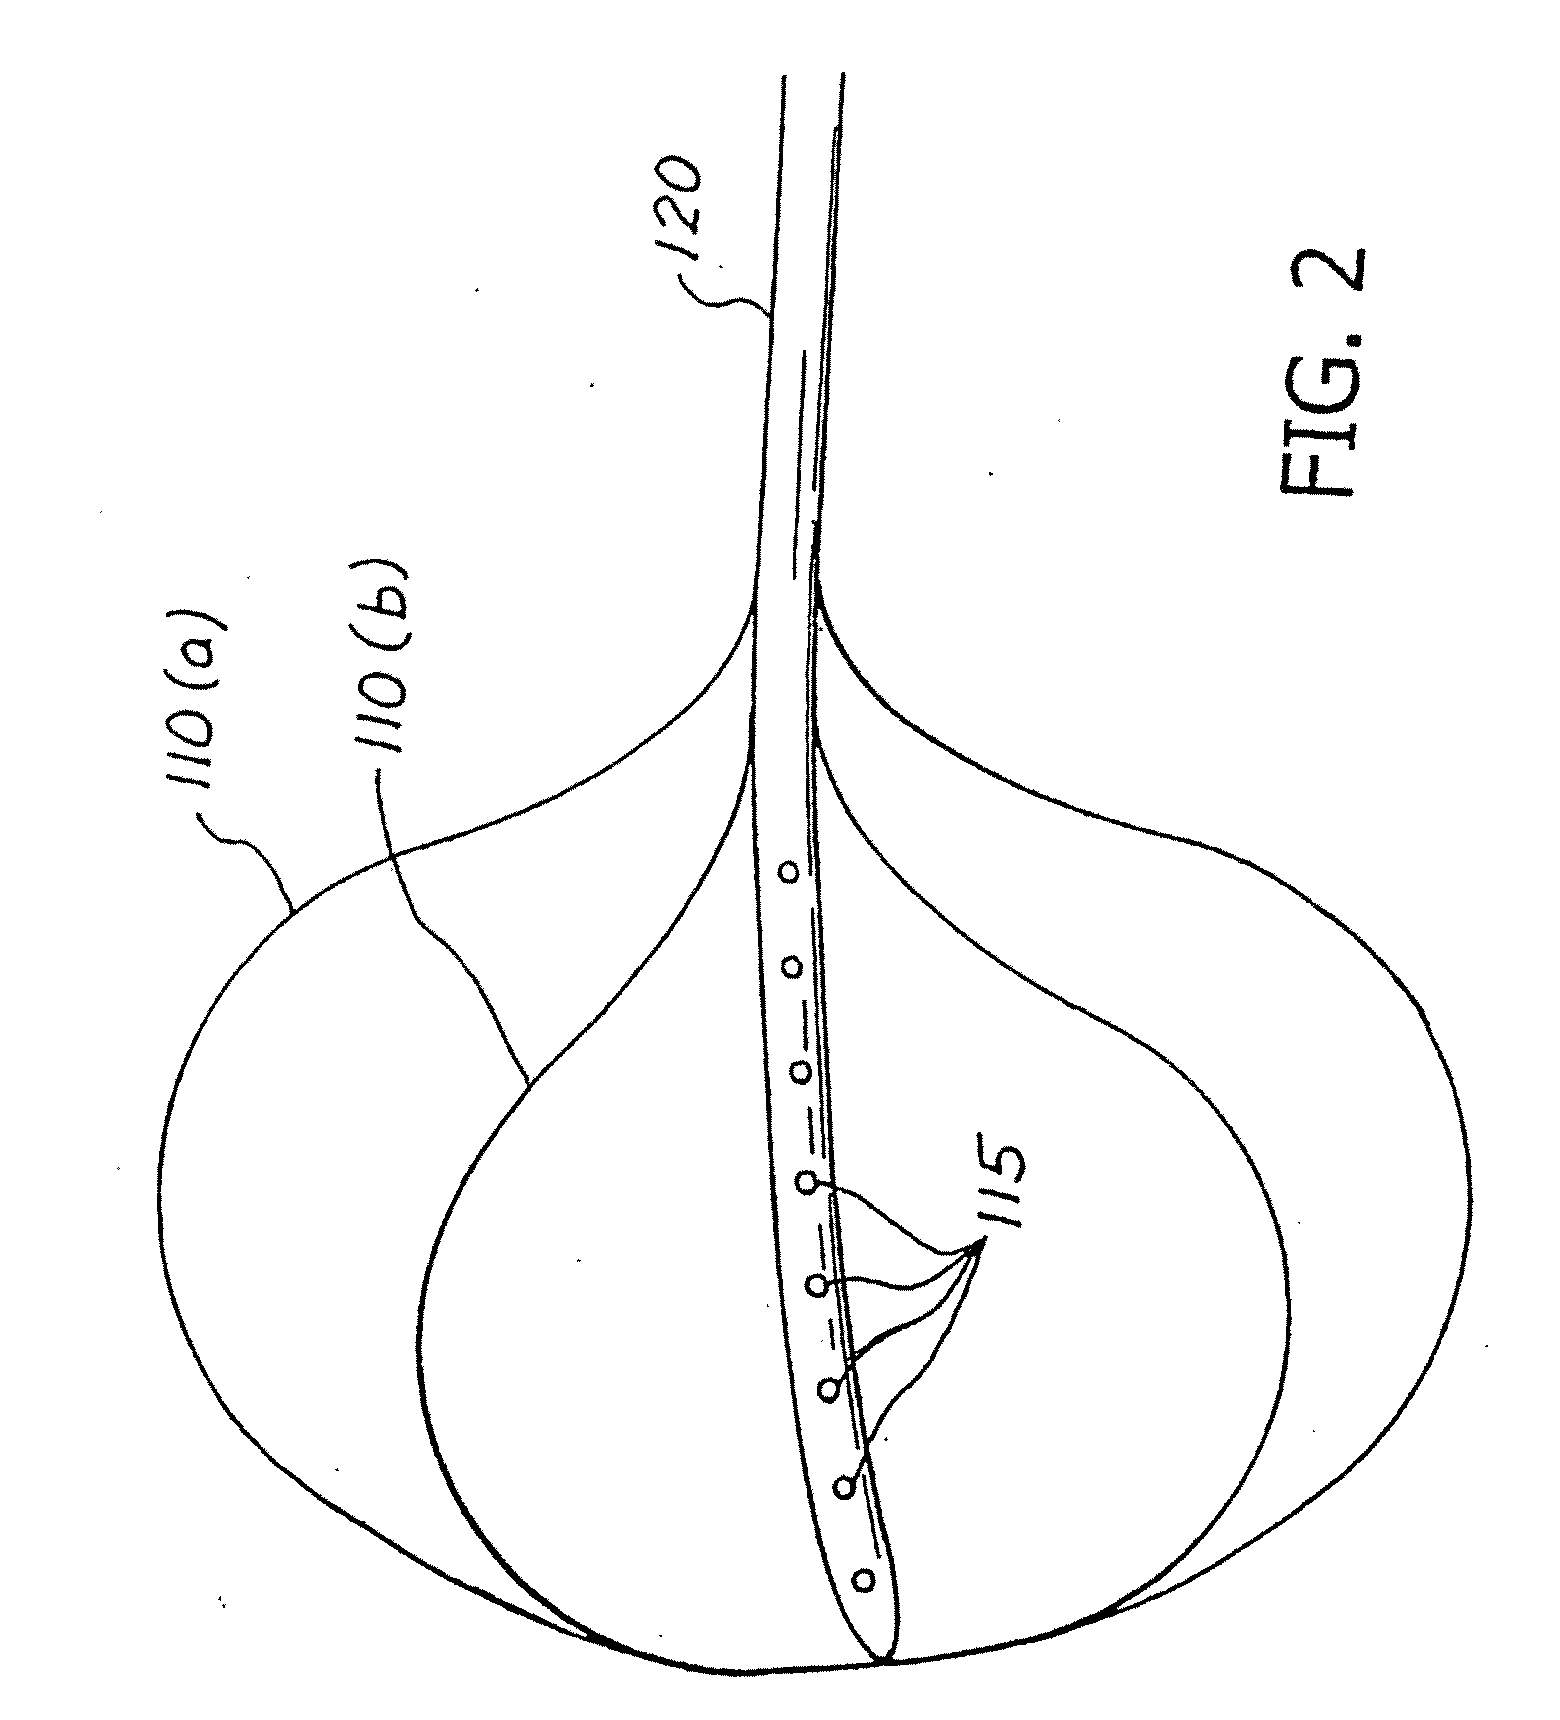 Balloon System and Methods for Treating Obesity